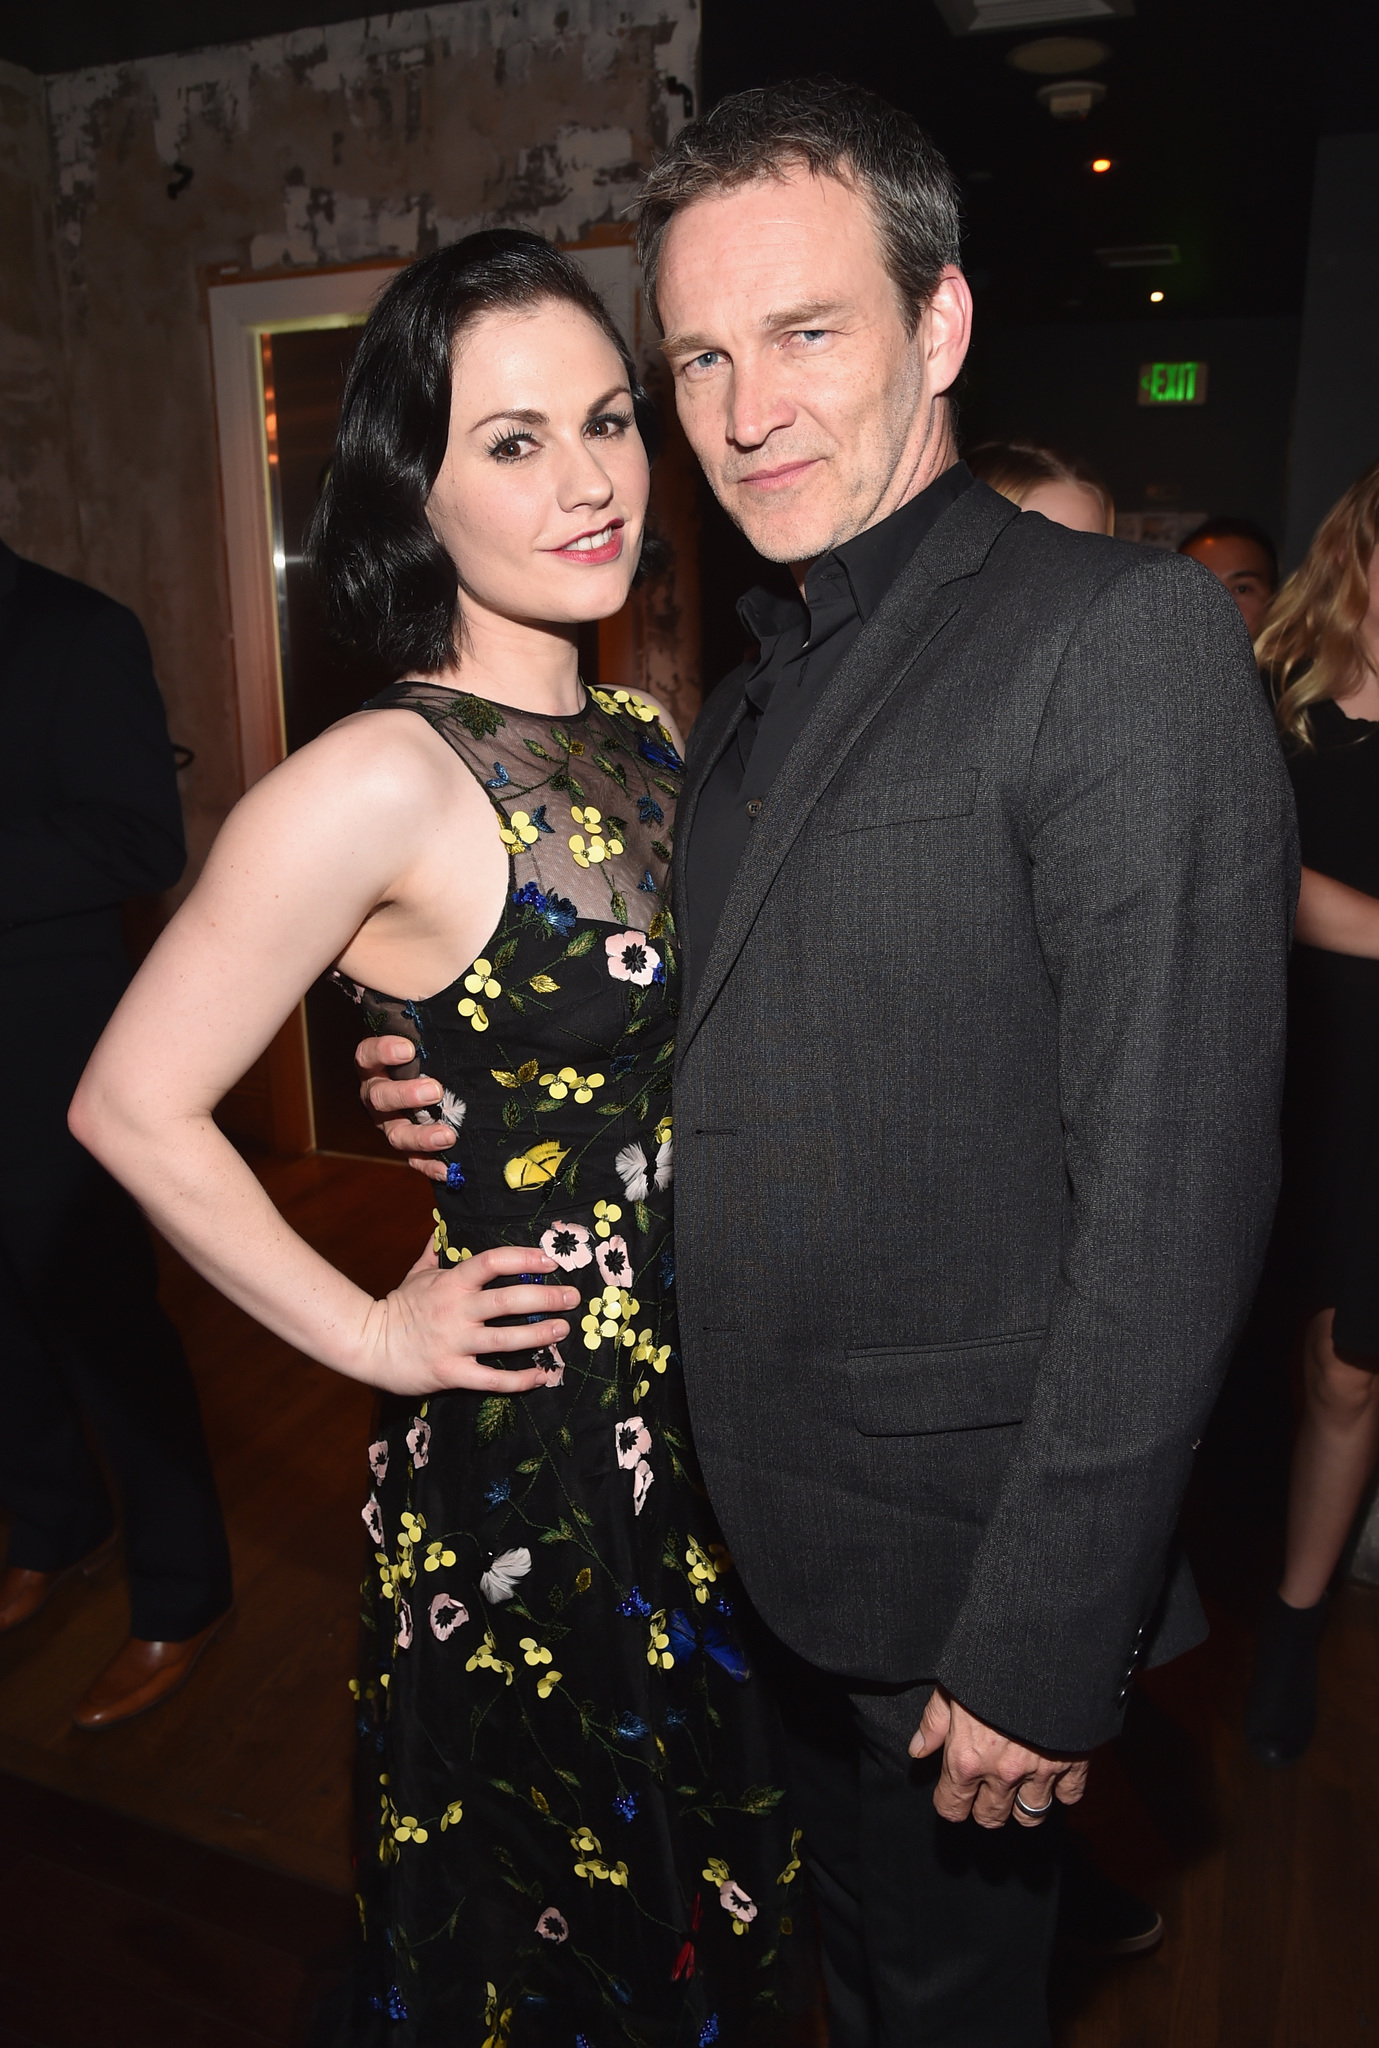 Anna Paquin and Stephen Moyer at event of Gerasis dinozauras (2015)